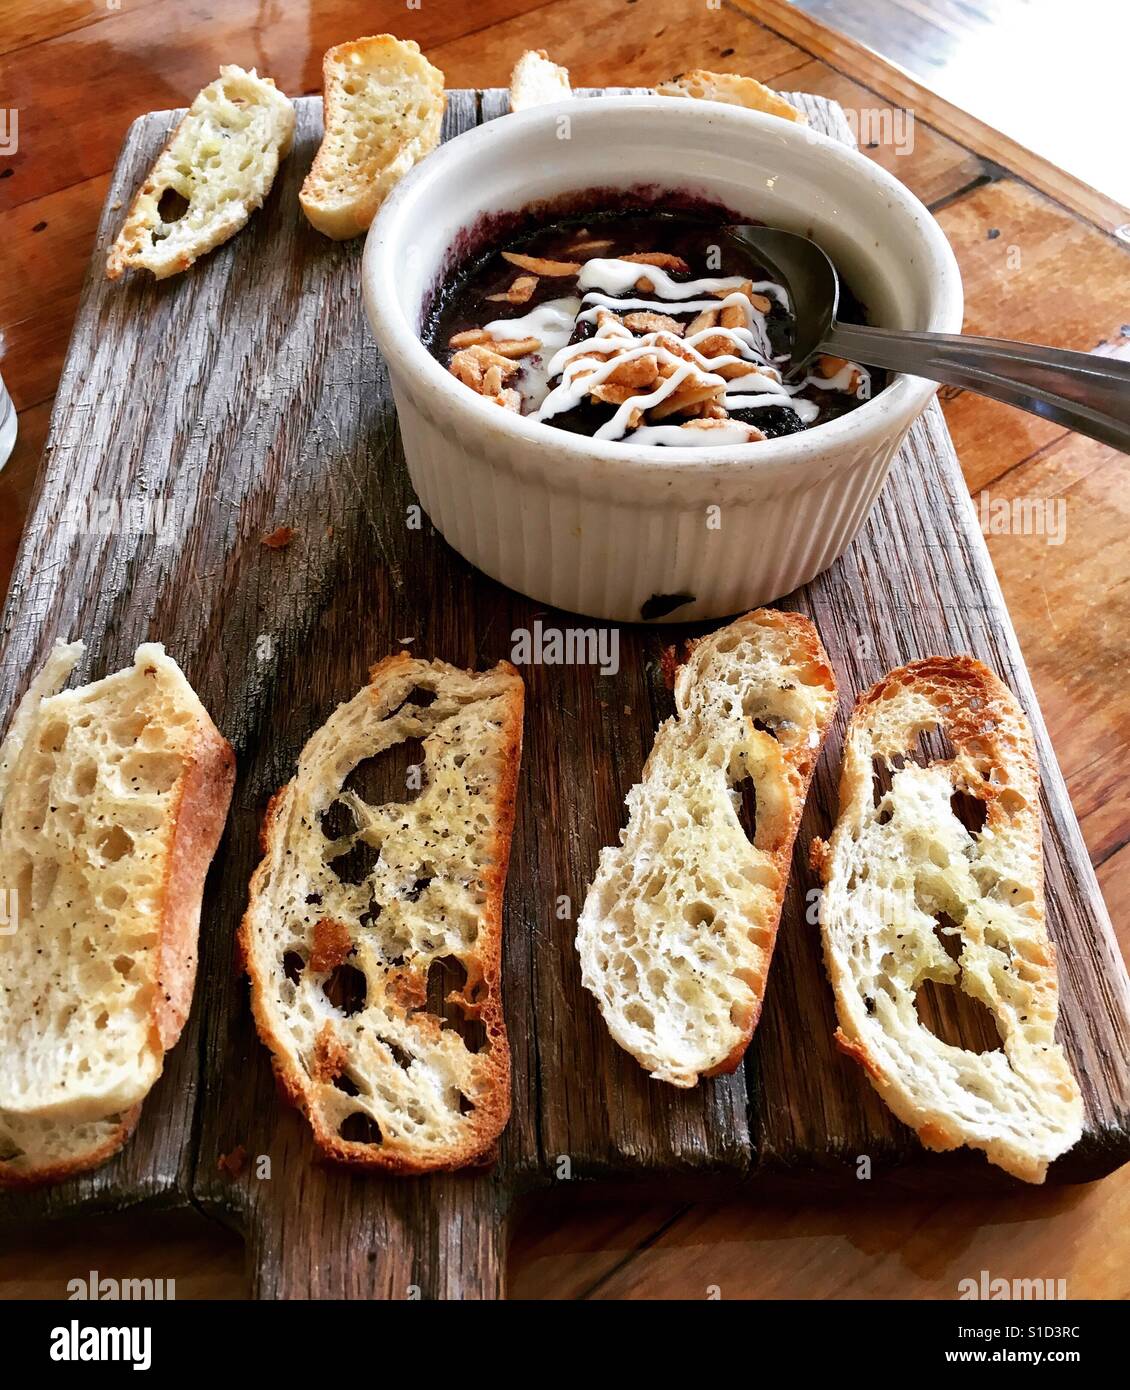 Blueberry Brie and bread Stock Photo